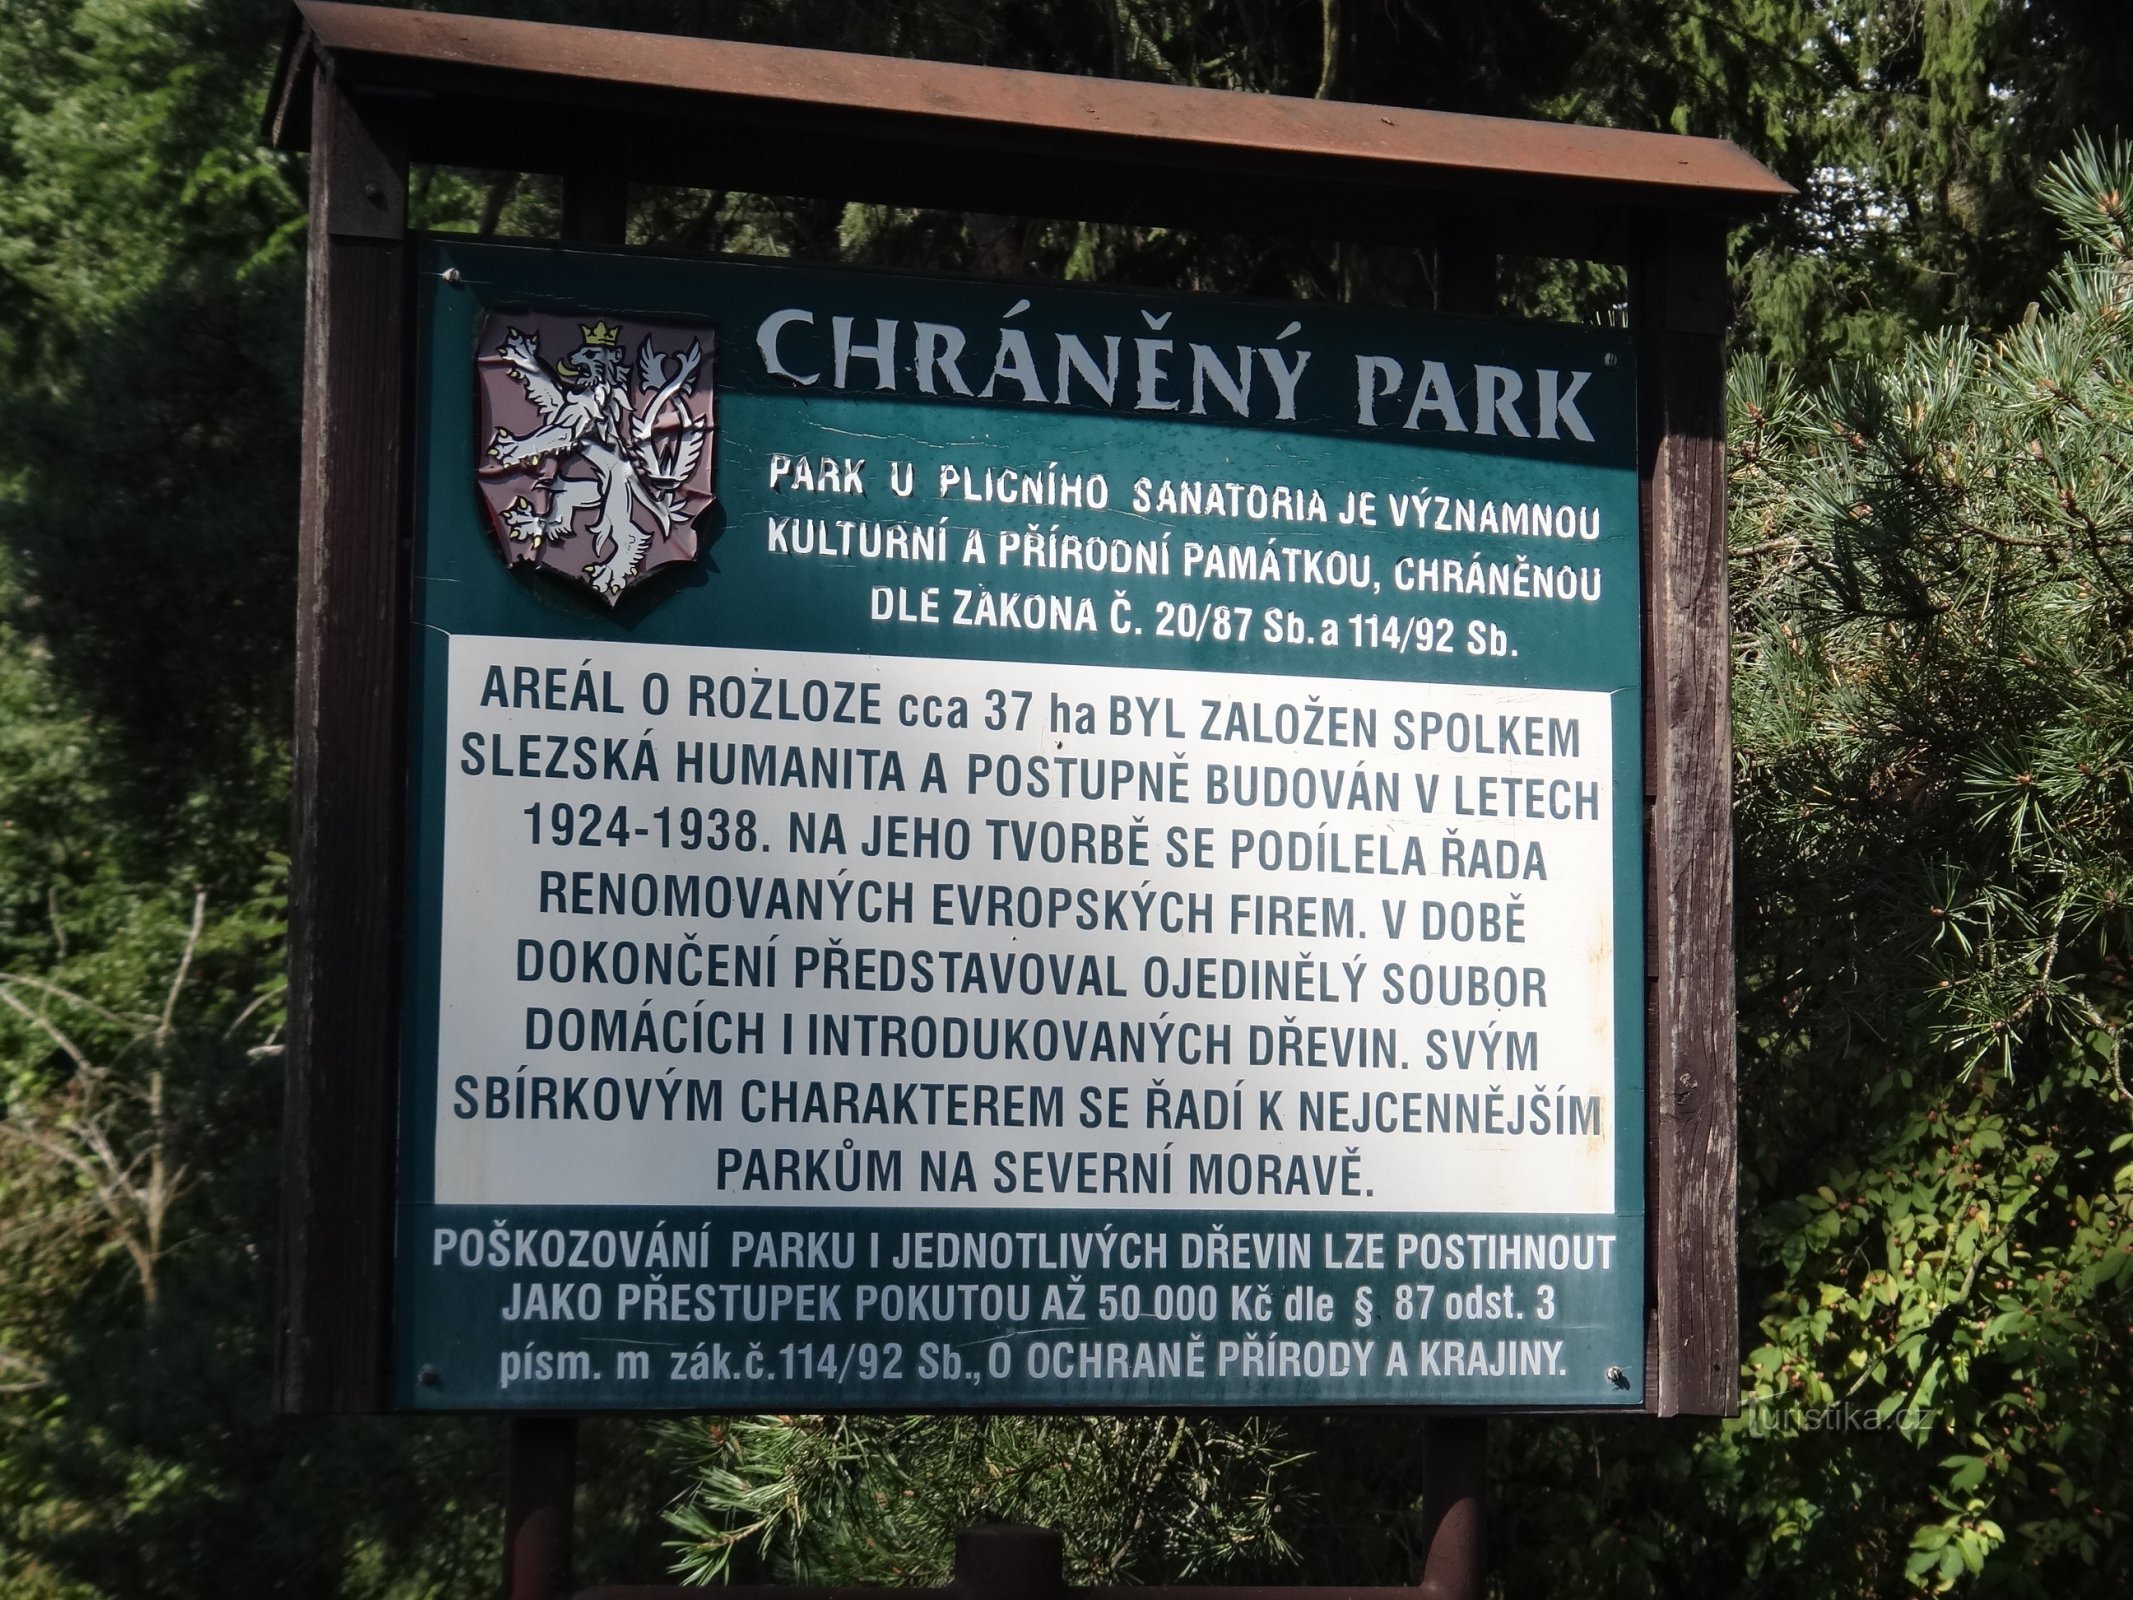 information panel about the park